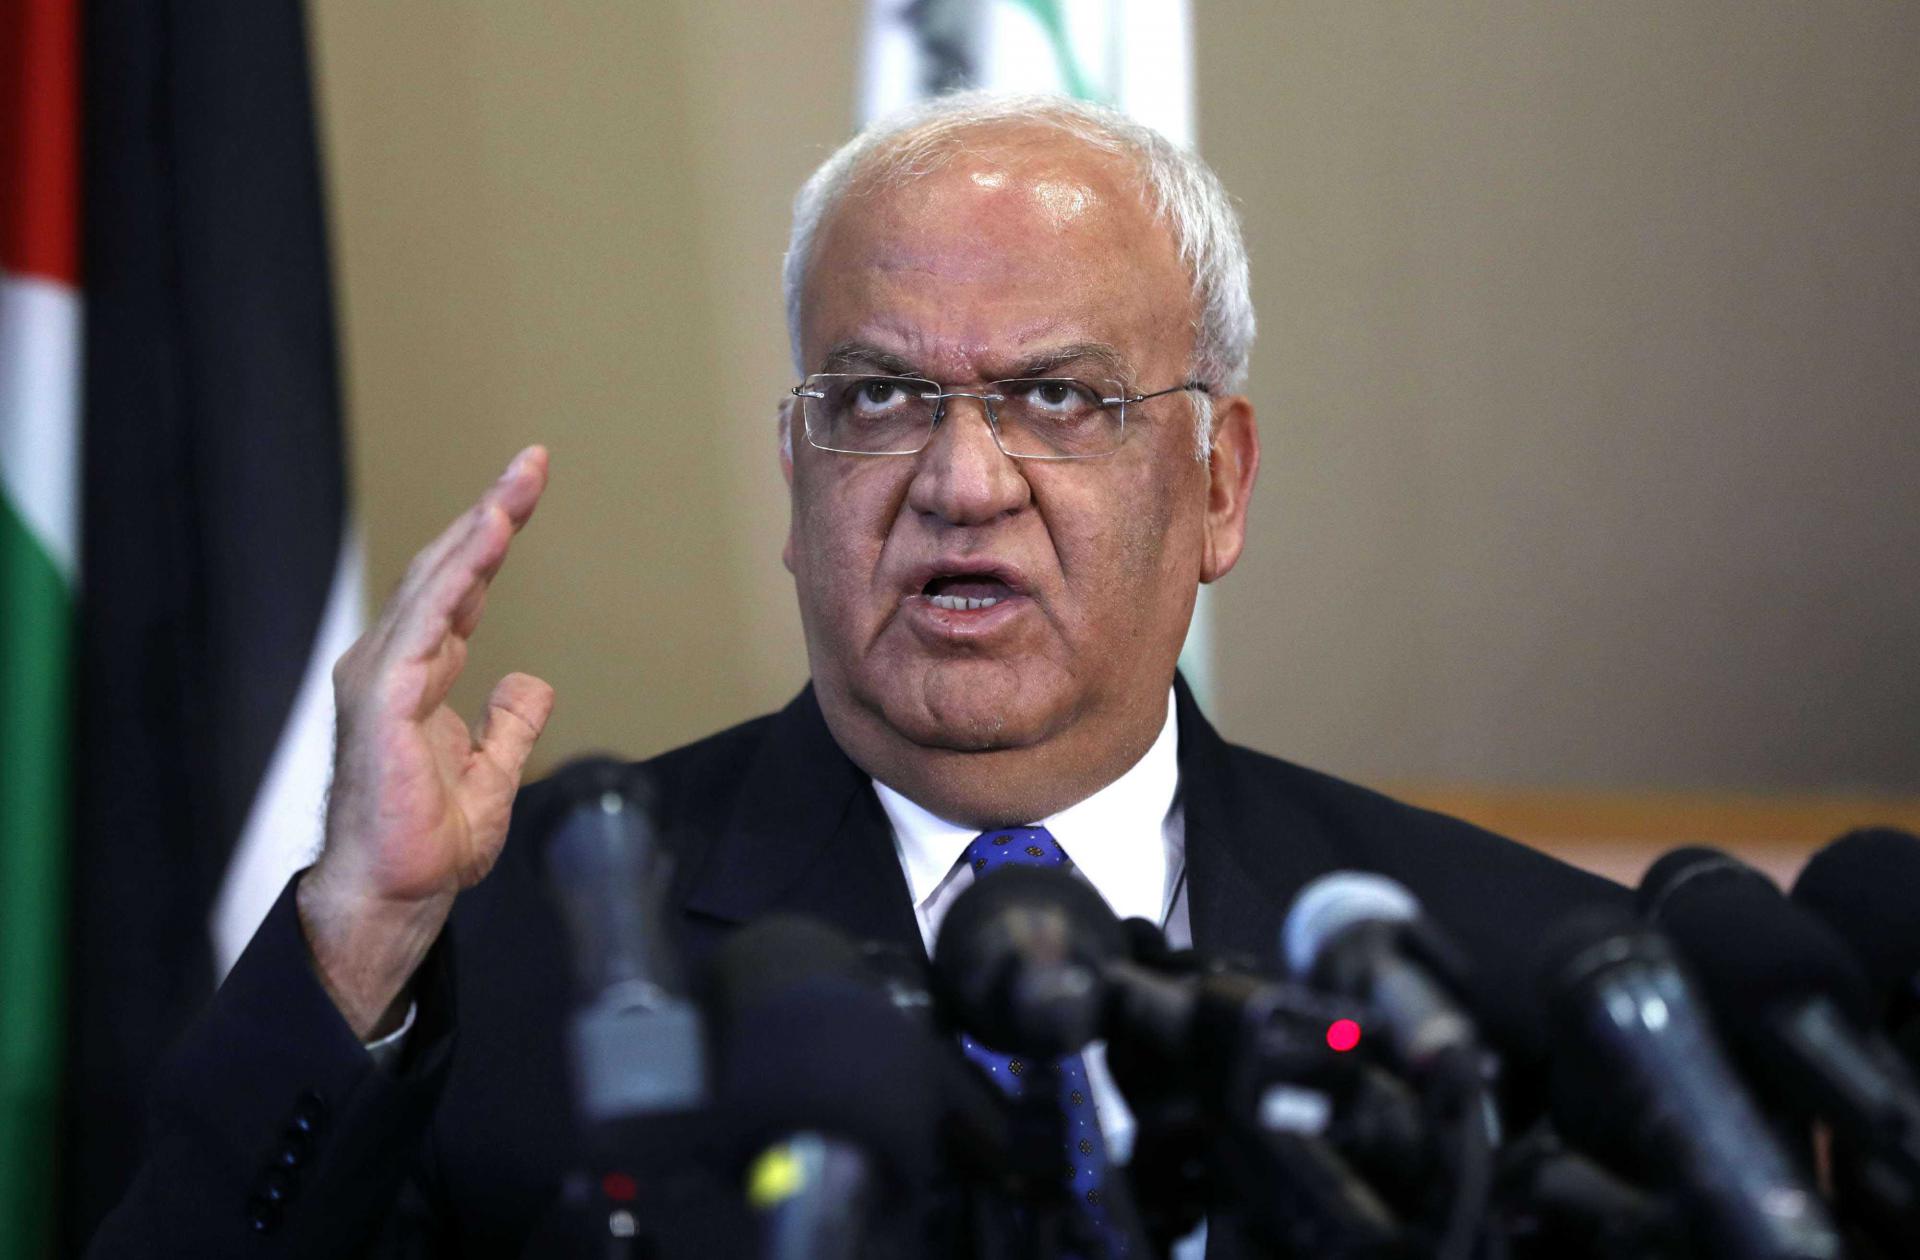 Palestine Liberation Organization's Secretary General Saeb Erekat speaks to journalists during a press conference in the West Bank